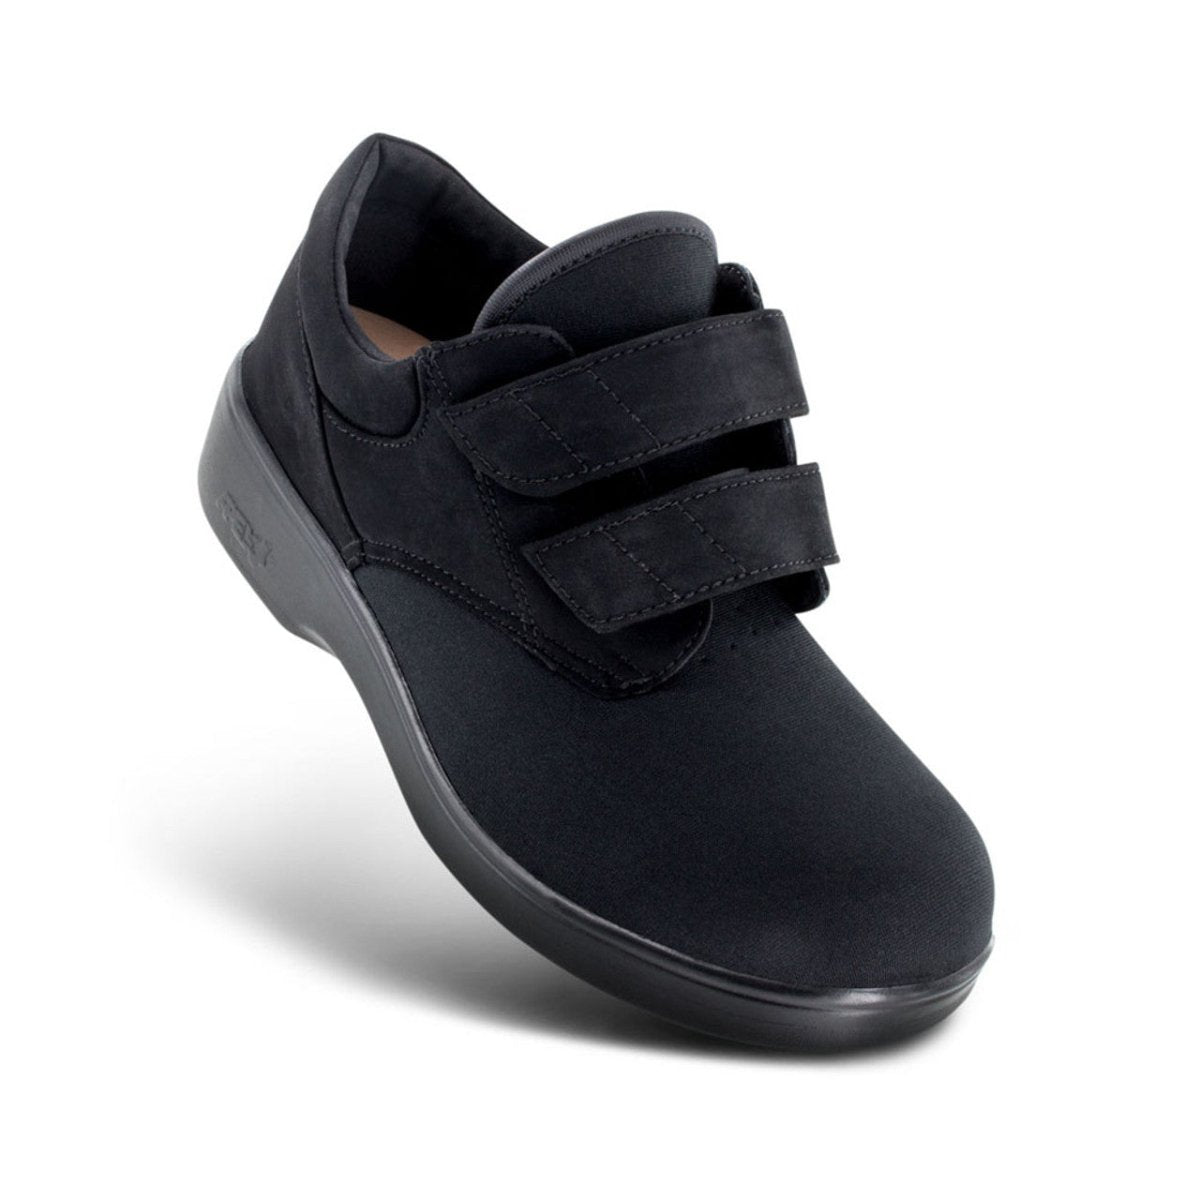 APEX 1200 AMB STRETCHER DOUBLE STRAP UNISEX CASUAL SHOE IN BLACK VEL - TLW Shoes